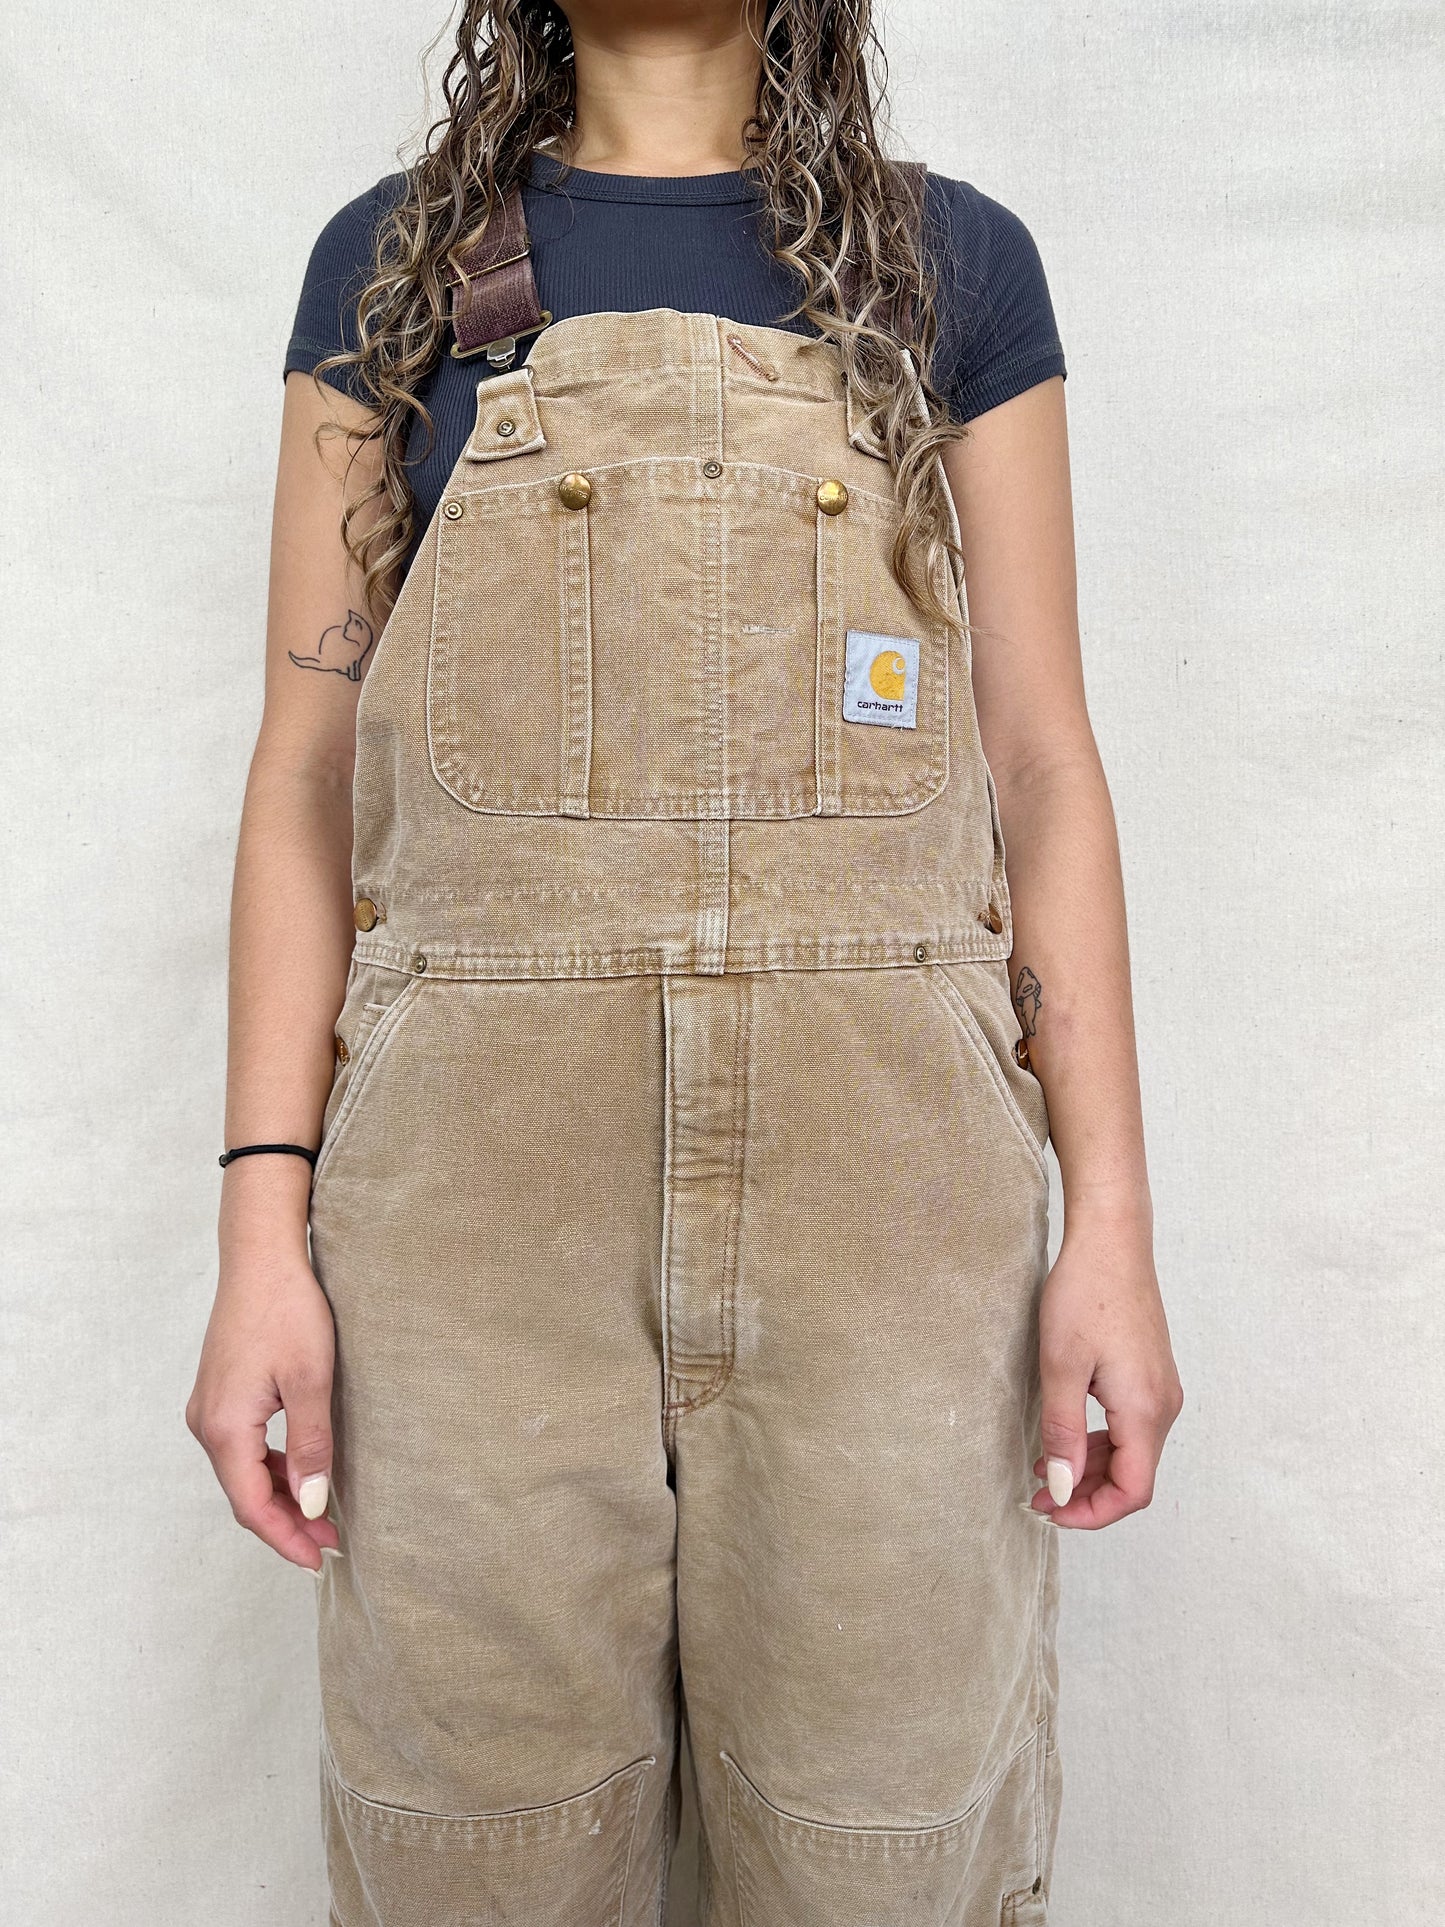 90's Carhartt Heavy Duty USA Made Vintage Dungarees/Overalls up to Size 36"